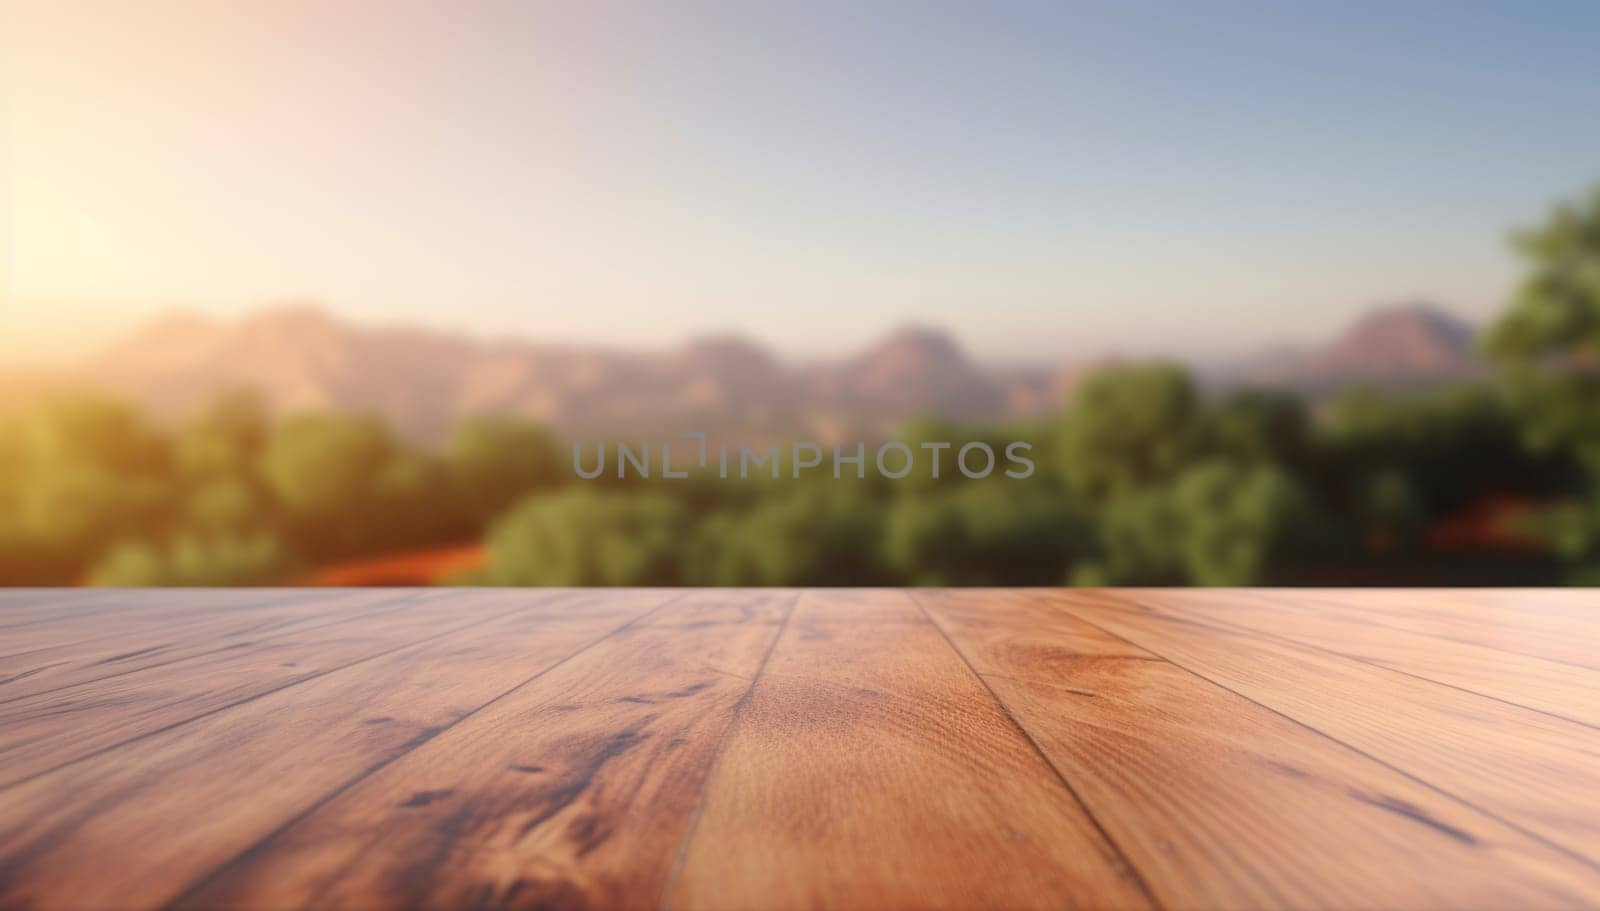 An empty wooden table top against the background of mountains, fields and the sky at sunset.